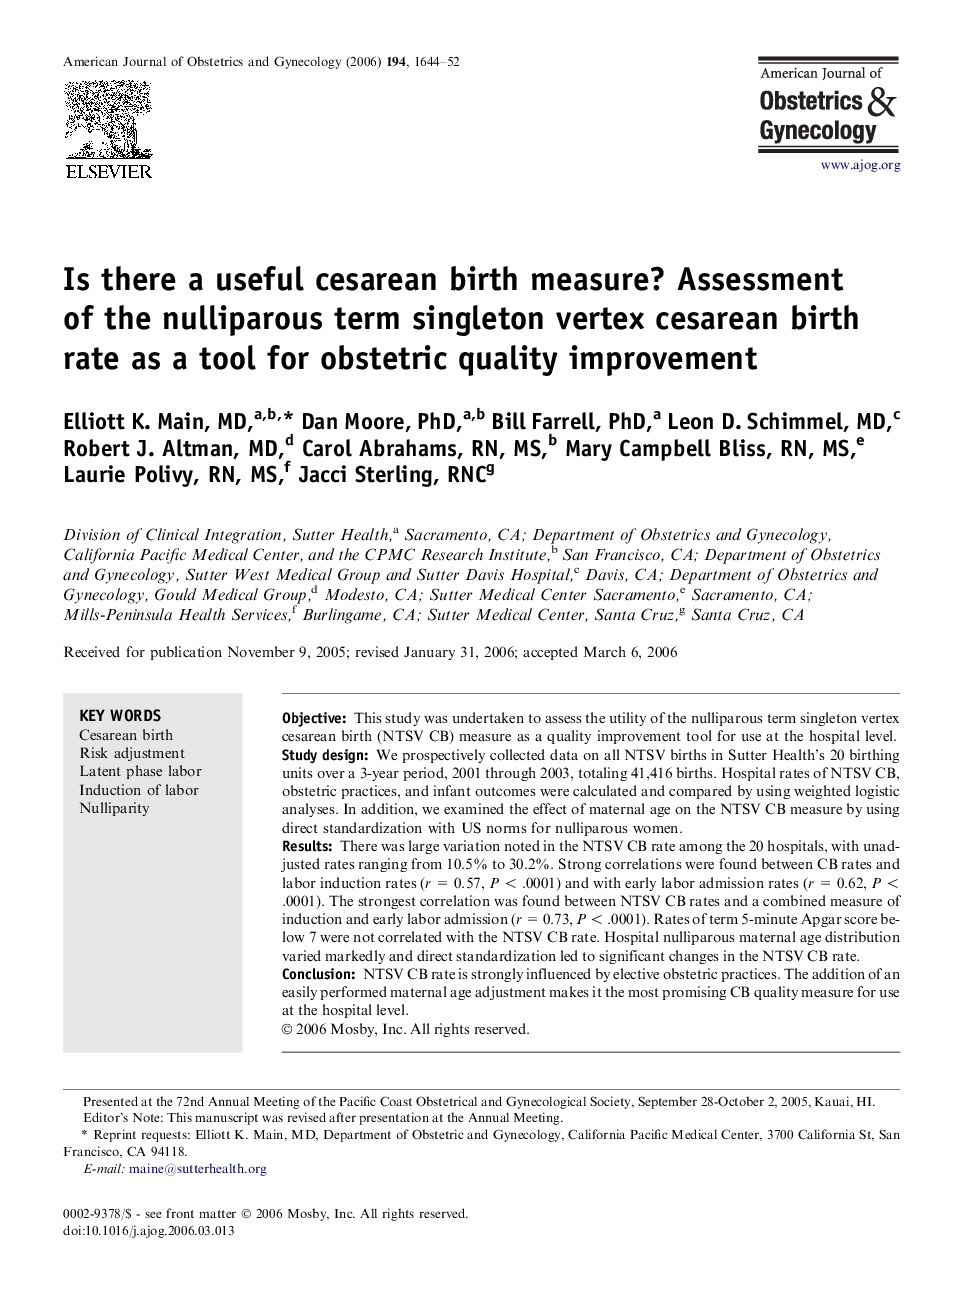 Is there a useful cesarean birth measure? Assessment of the nulliparous term singleton vertex cesarean birth rate as a tool for obstetric quality improvement 